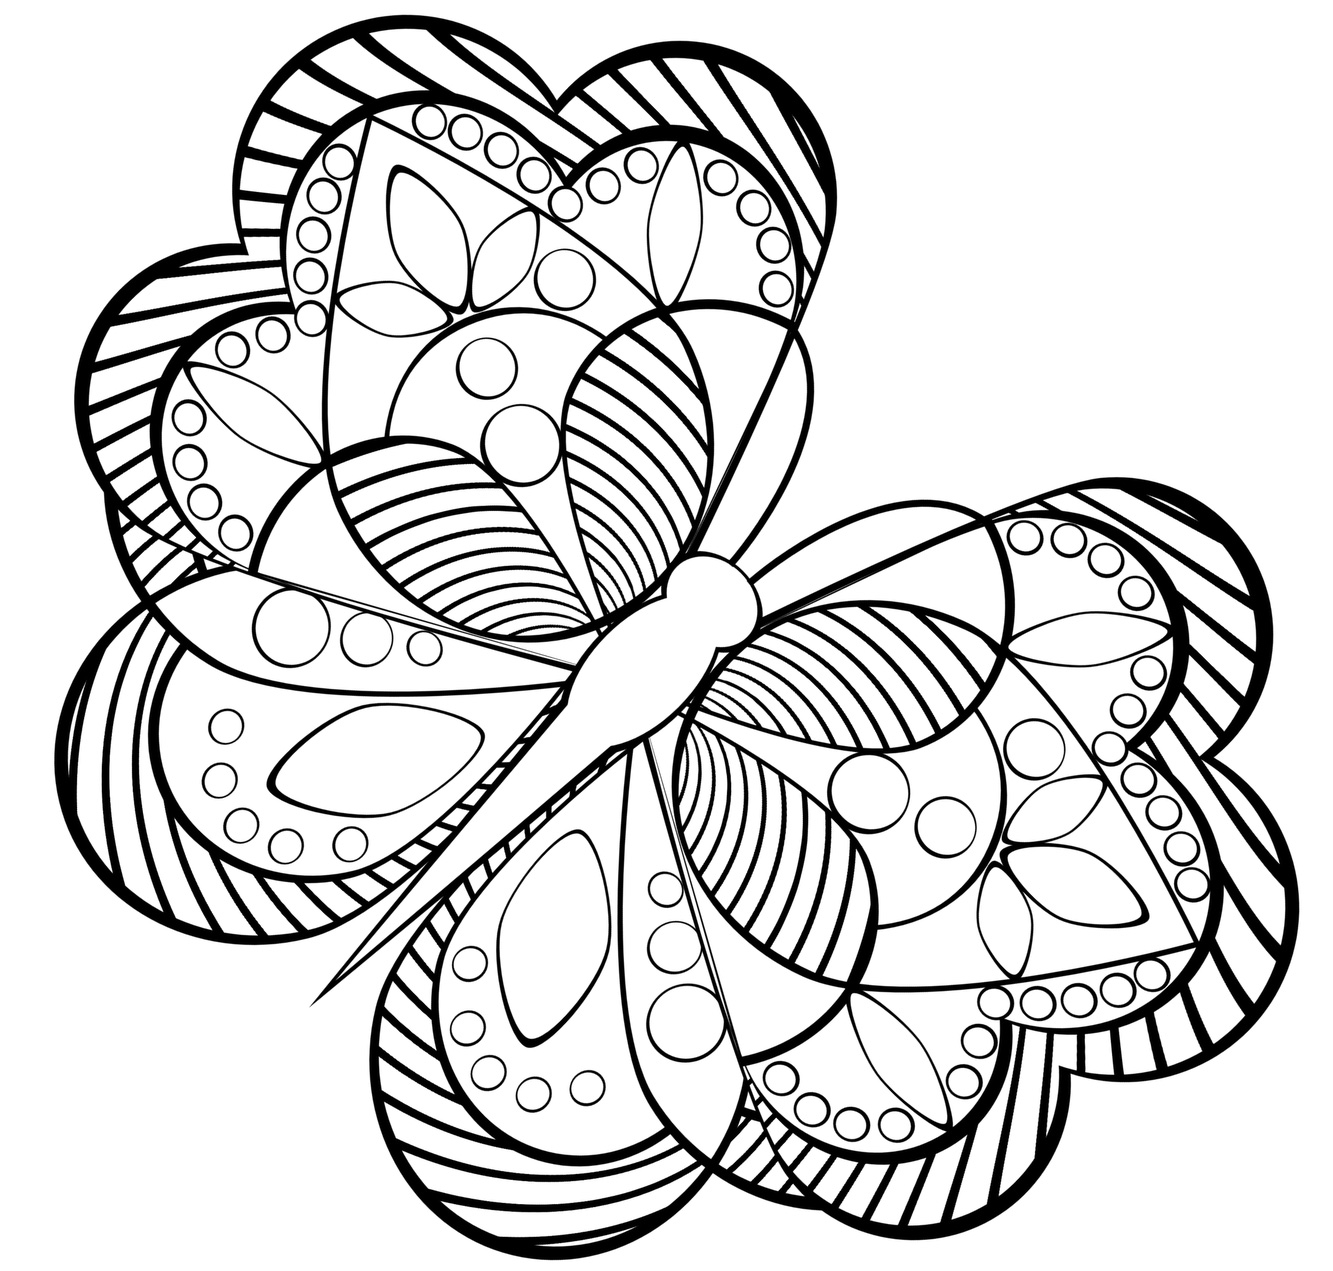 Anti Stress Coloring Pages For Girls To Download And Print For Free